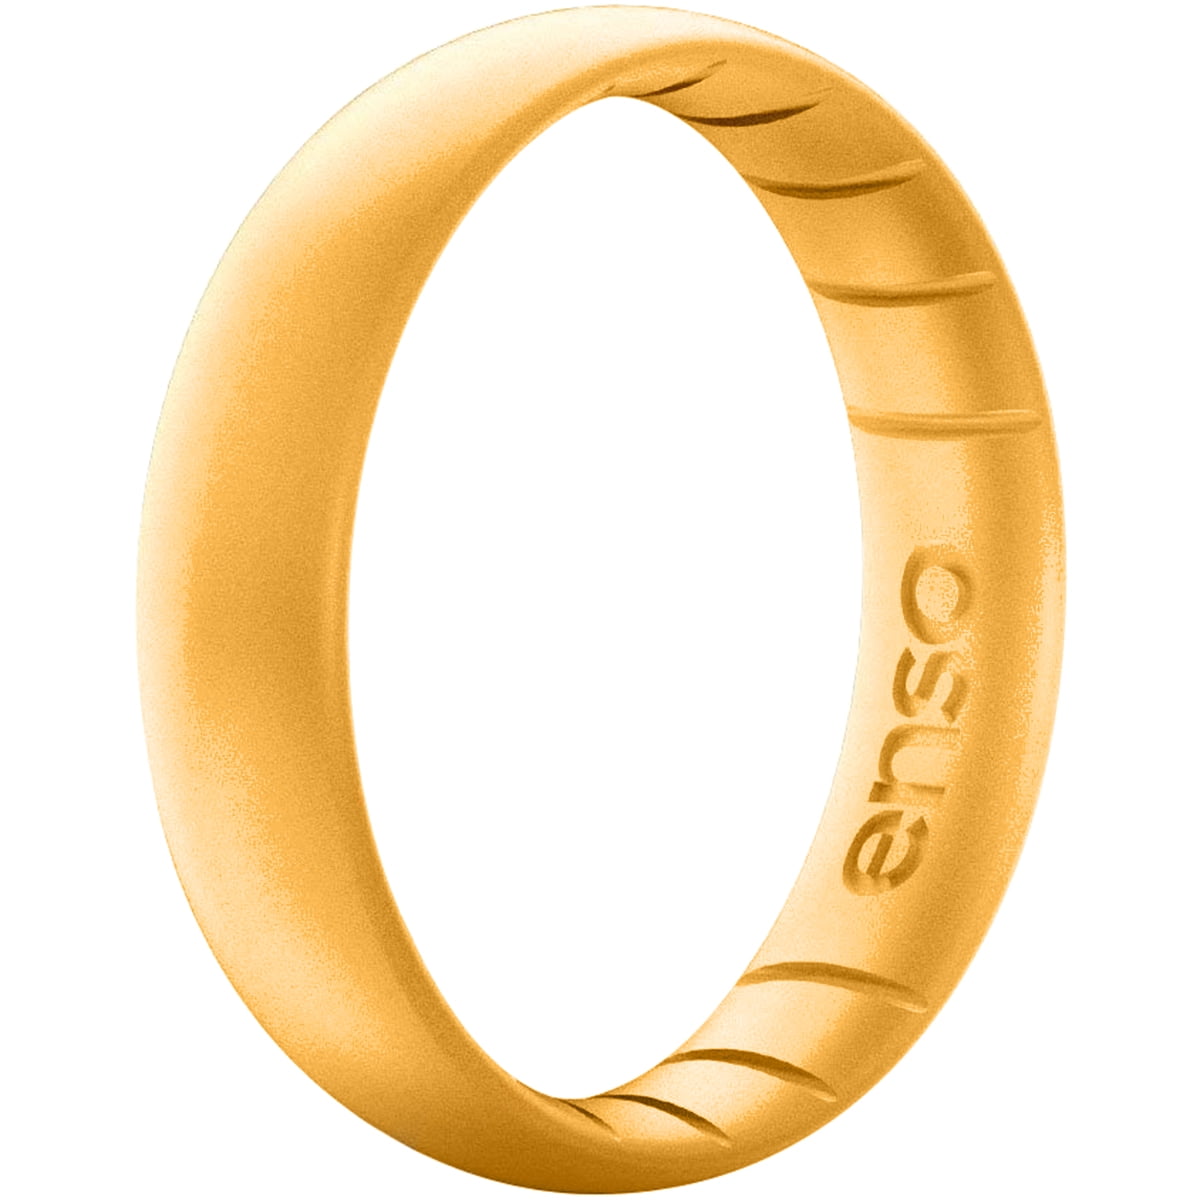 Enso Rings - Comfortable, stylish, and budget-friendly. 😍 These silicone  rings are made to adapt to any lifestyle without sacrificing any style.  Choose from a variety of designs and colors in women's